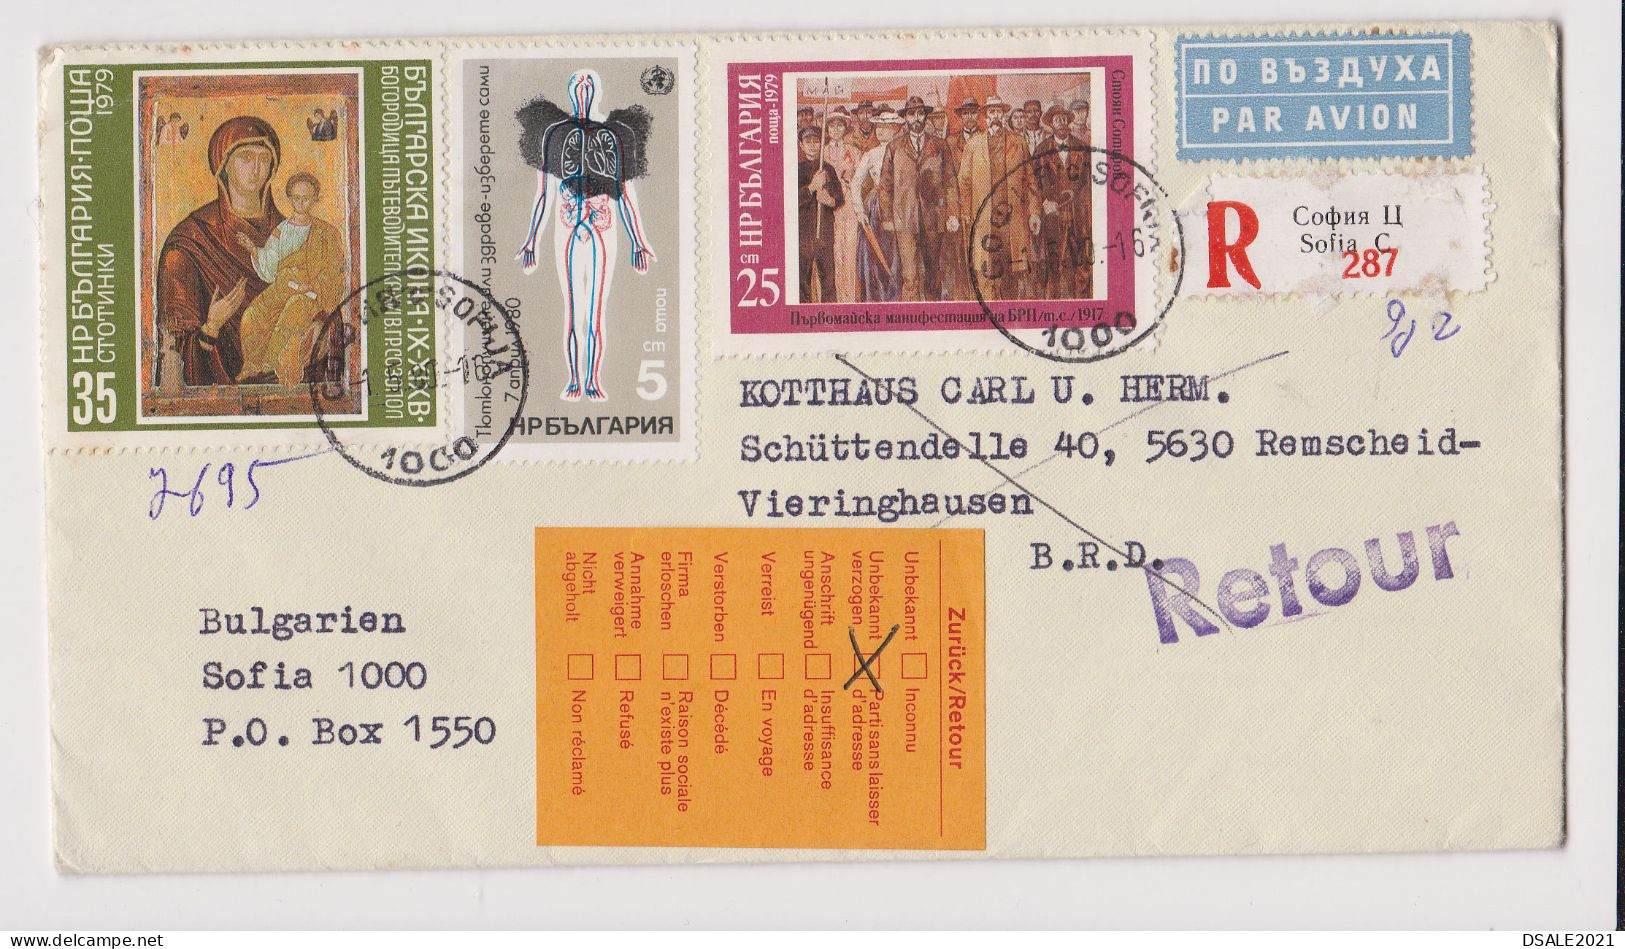 Bulgaria Bulgarien 1980 Registered Airmail Cover W/Colorful Topic Stamps Sent To Germany BRD, Return To Sender (66311) - Storia Postale